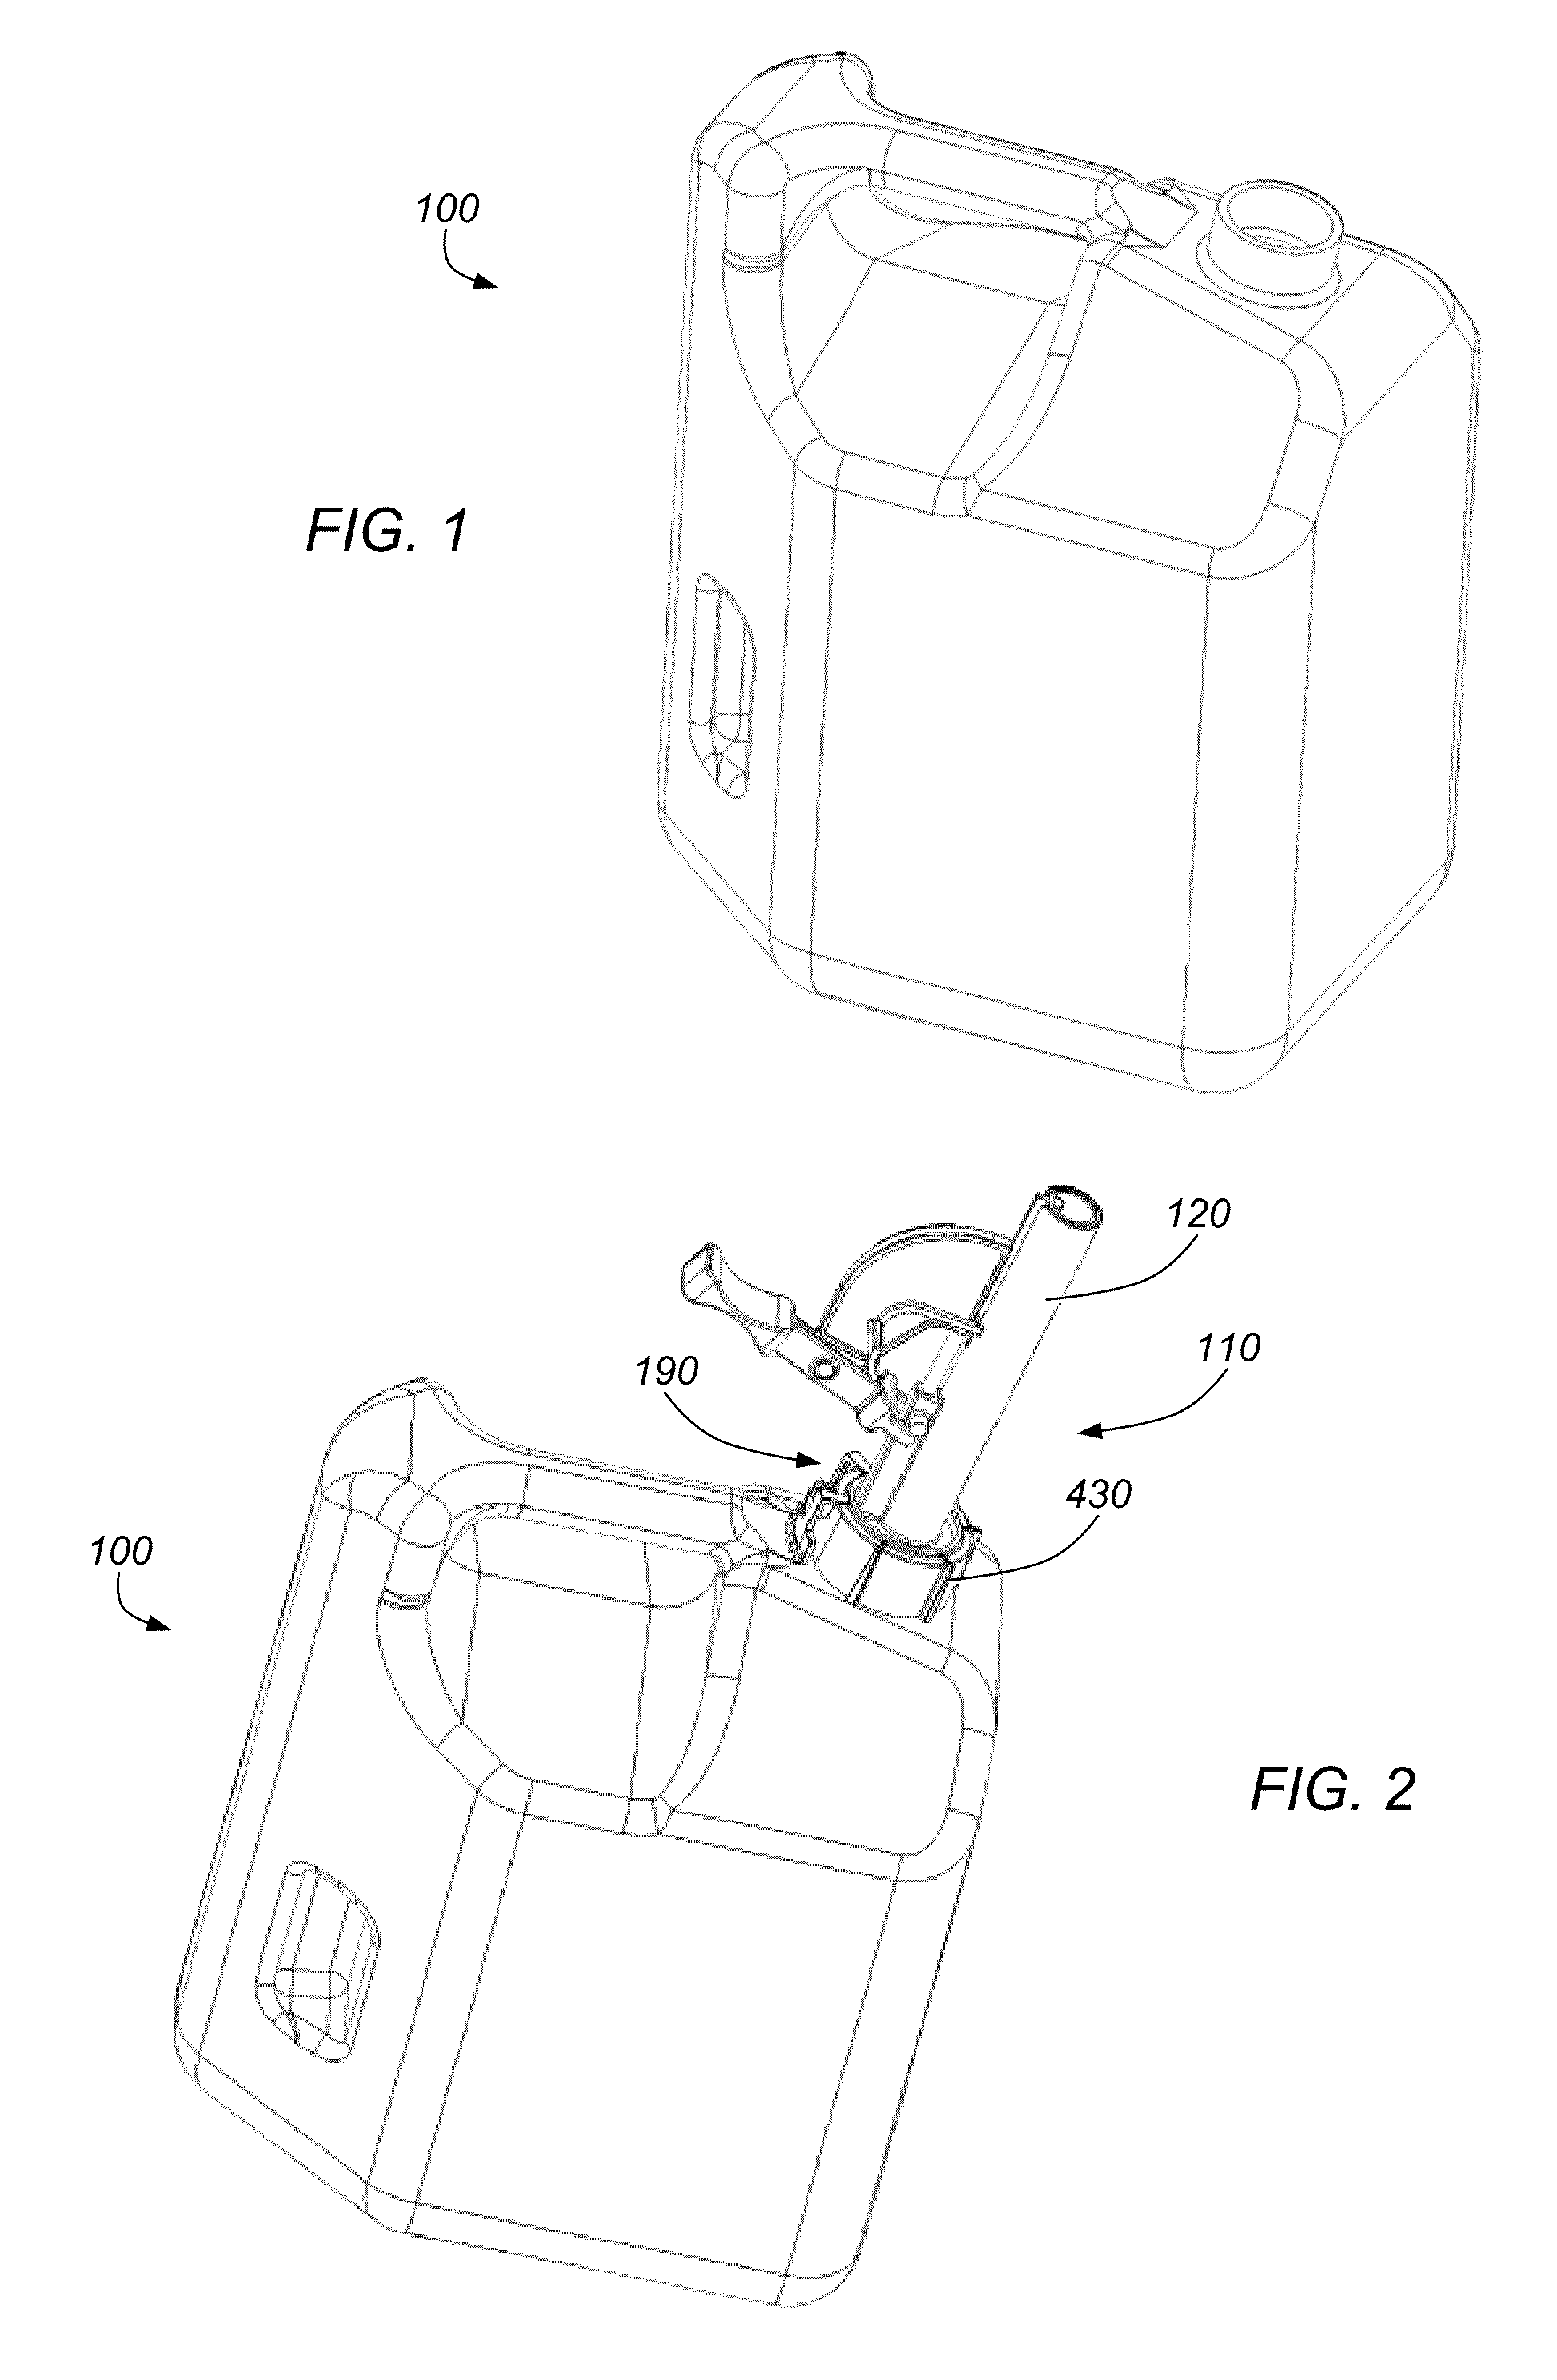 Pourable spout with child proof mechanism